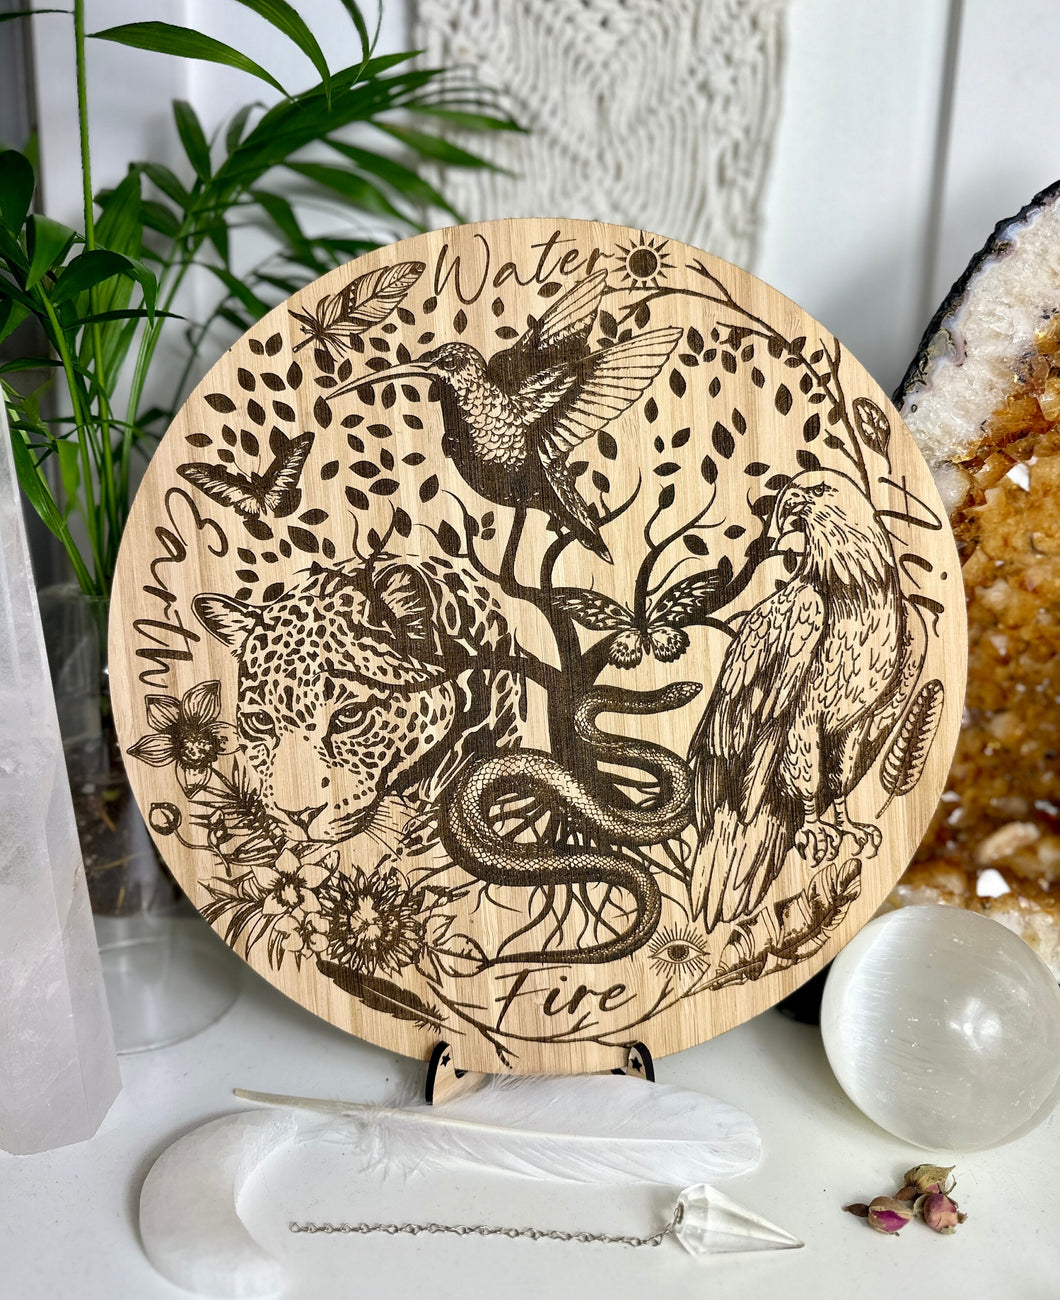 Round Shamanic 4 directions board | Serpent | jaguar | hummingbird | Eagle condor- locally designed and made